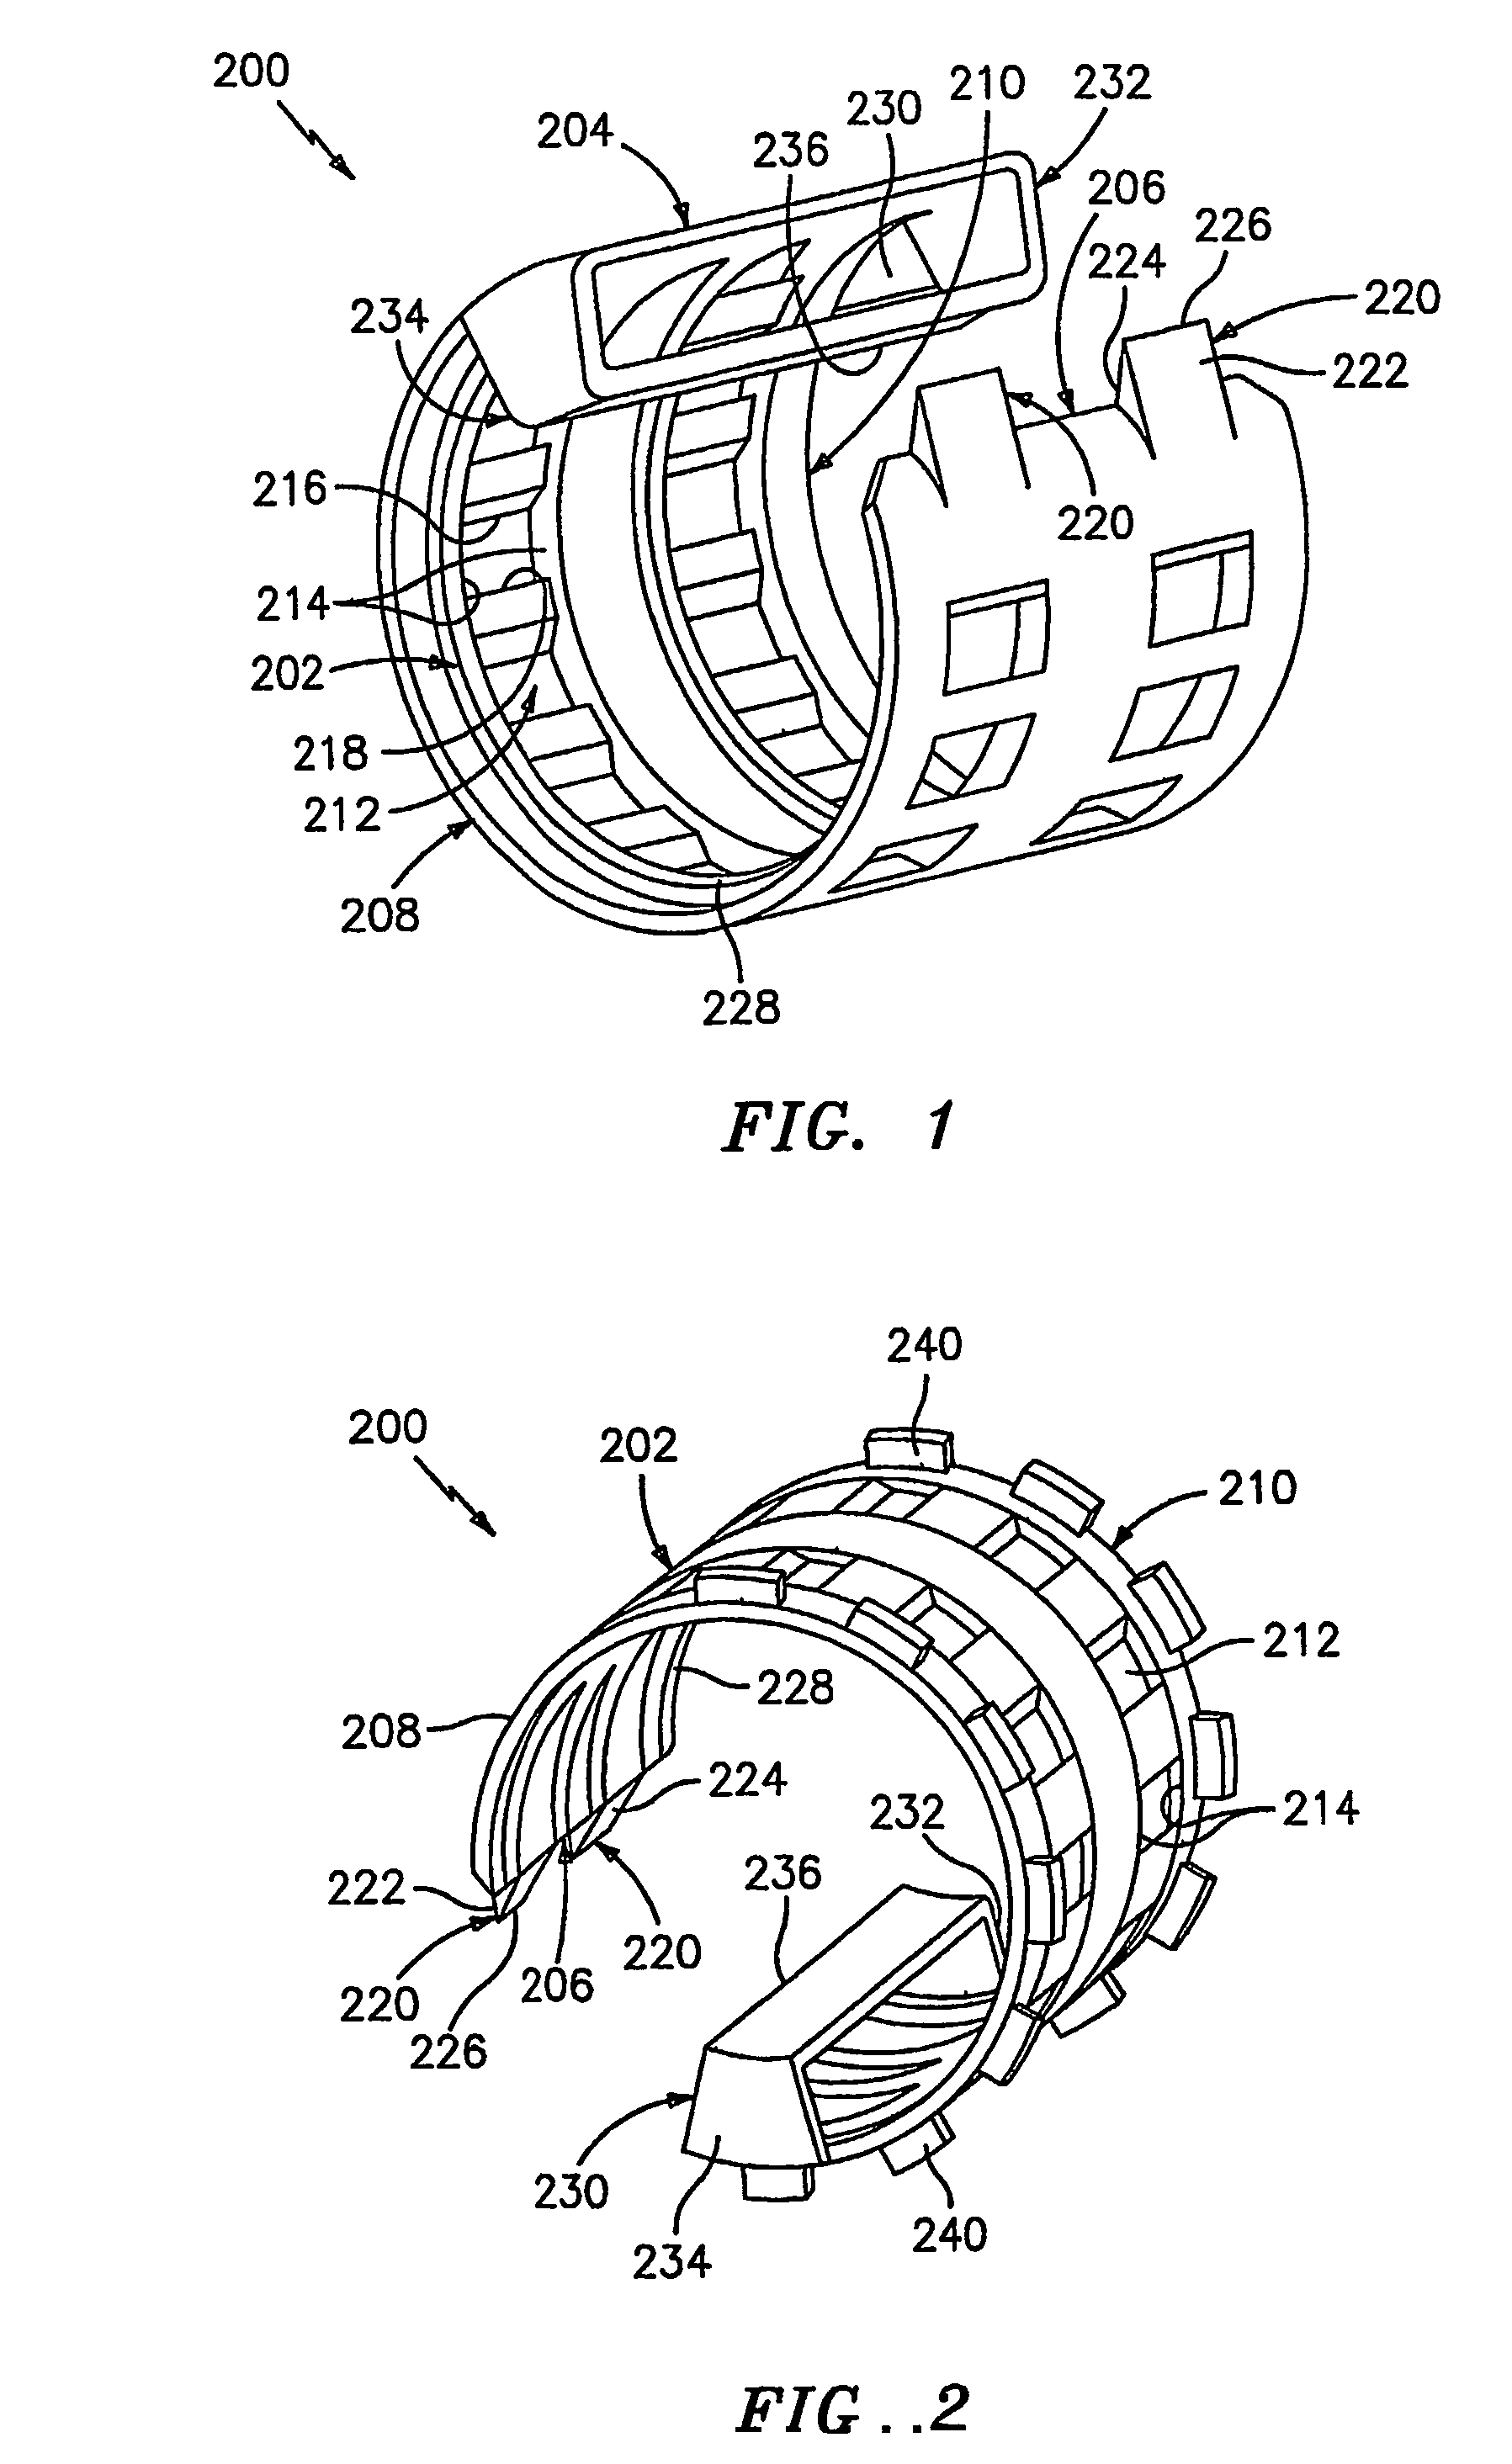 Method and apparatus for anastomosis including annular joining member